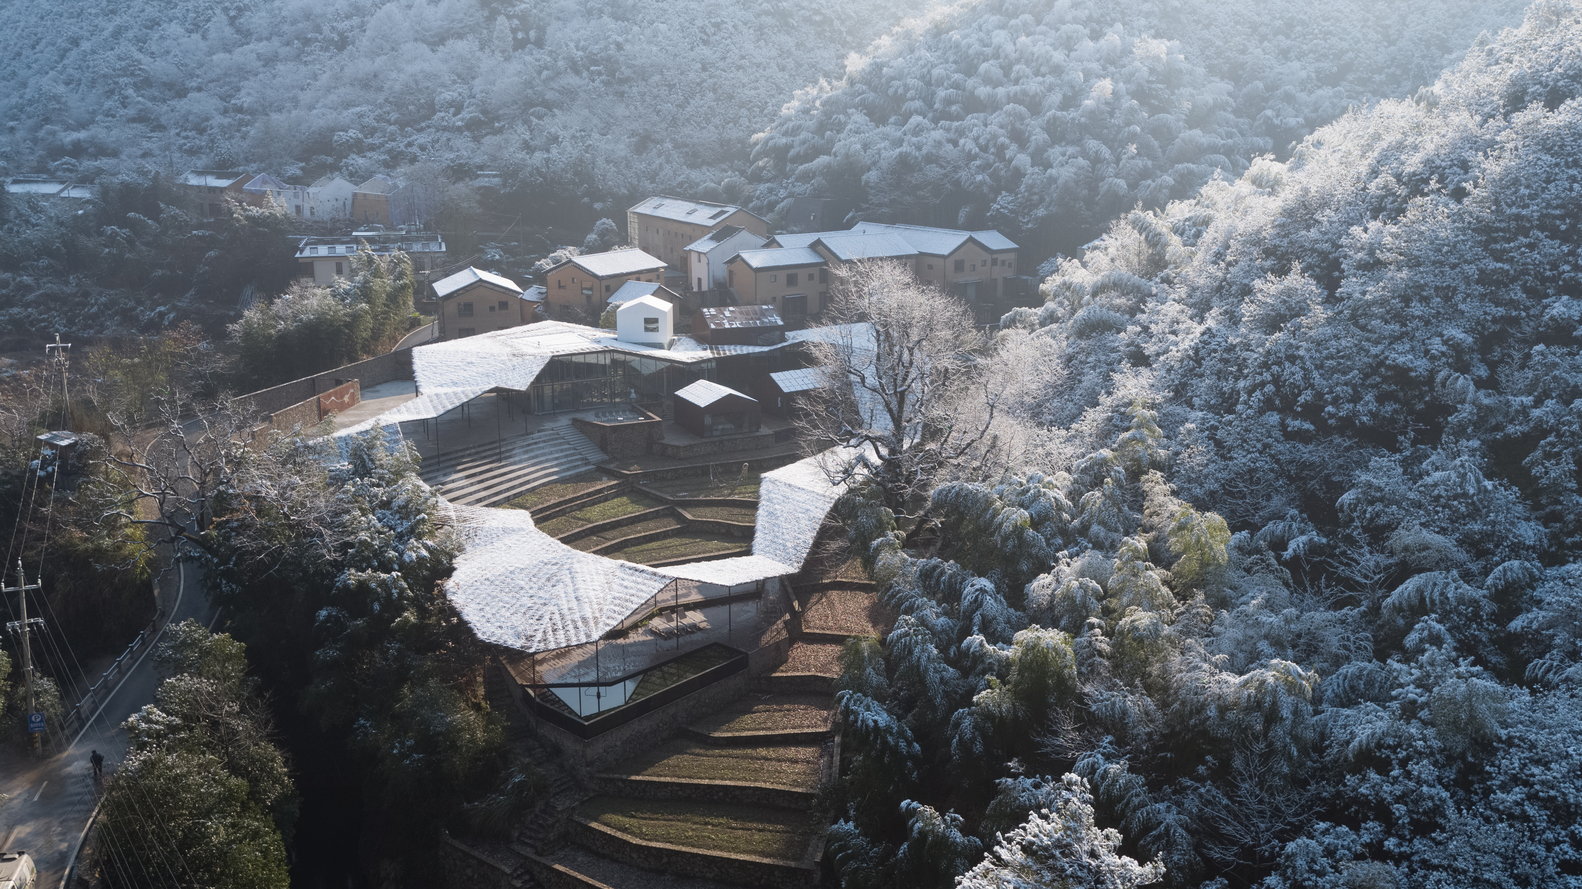 Aerial view of the Sou Fujimoto-designed Flowing Cloud pavilion while snow is falling.